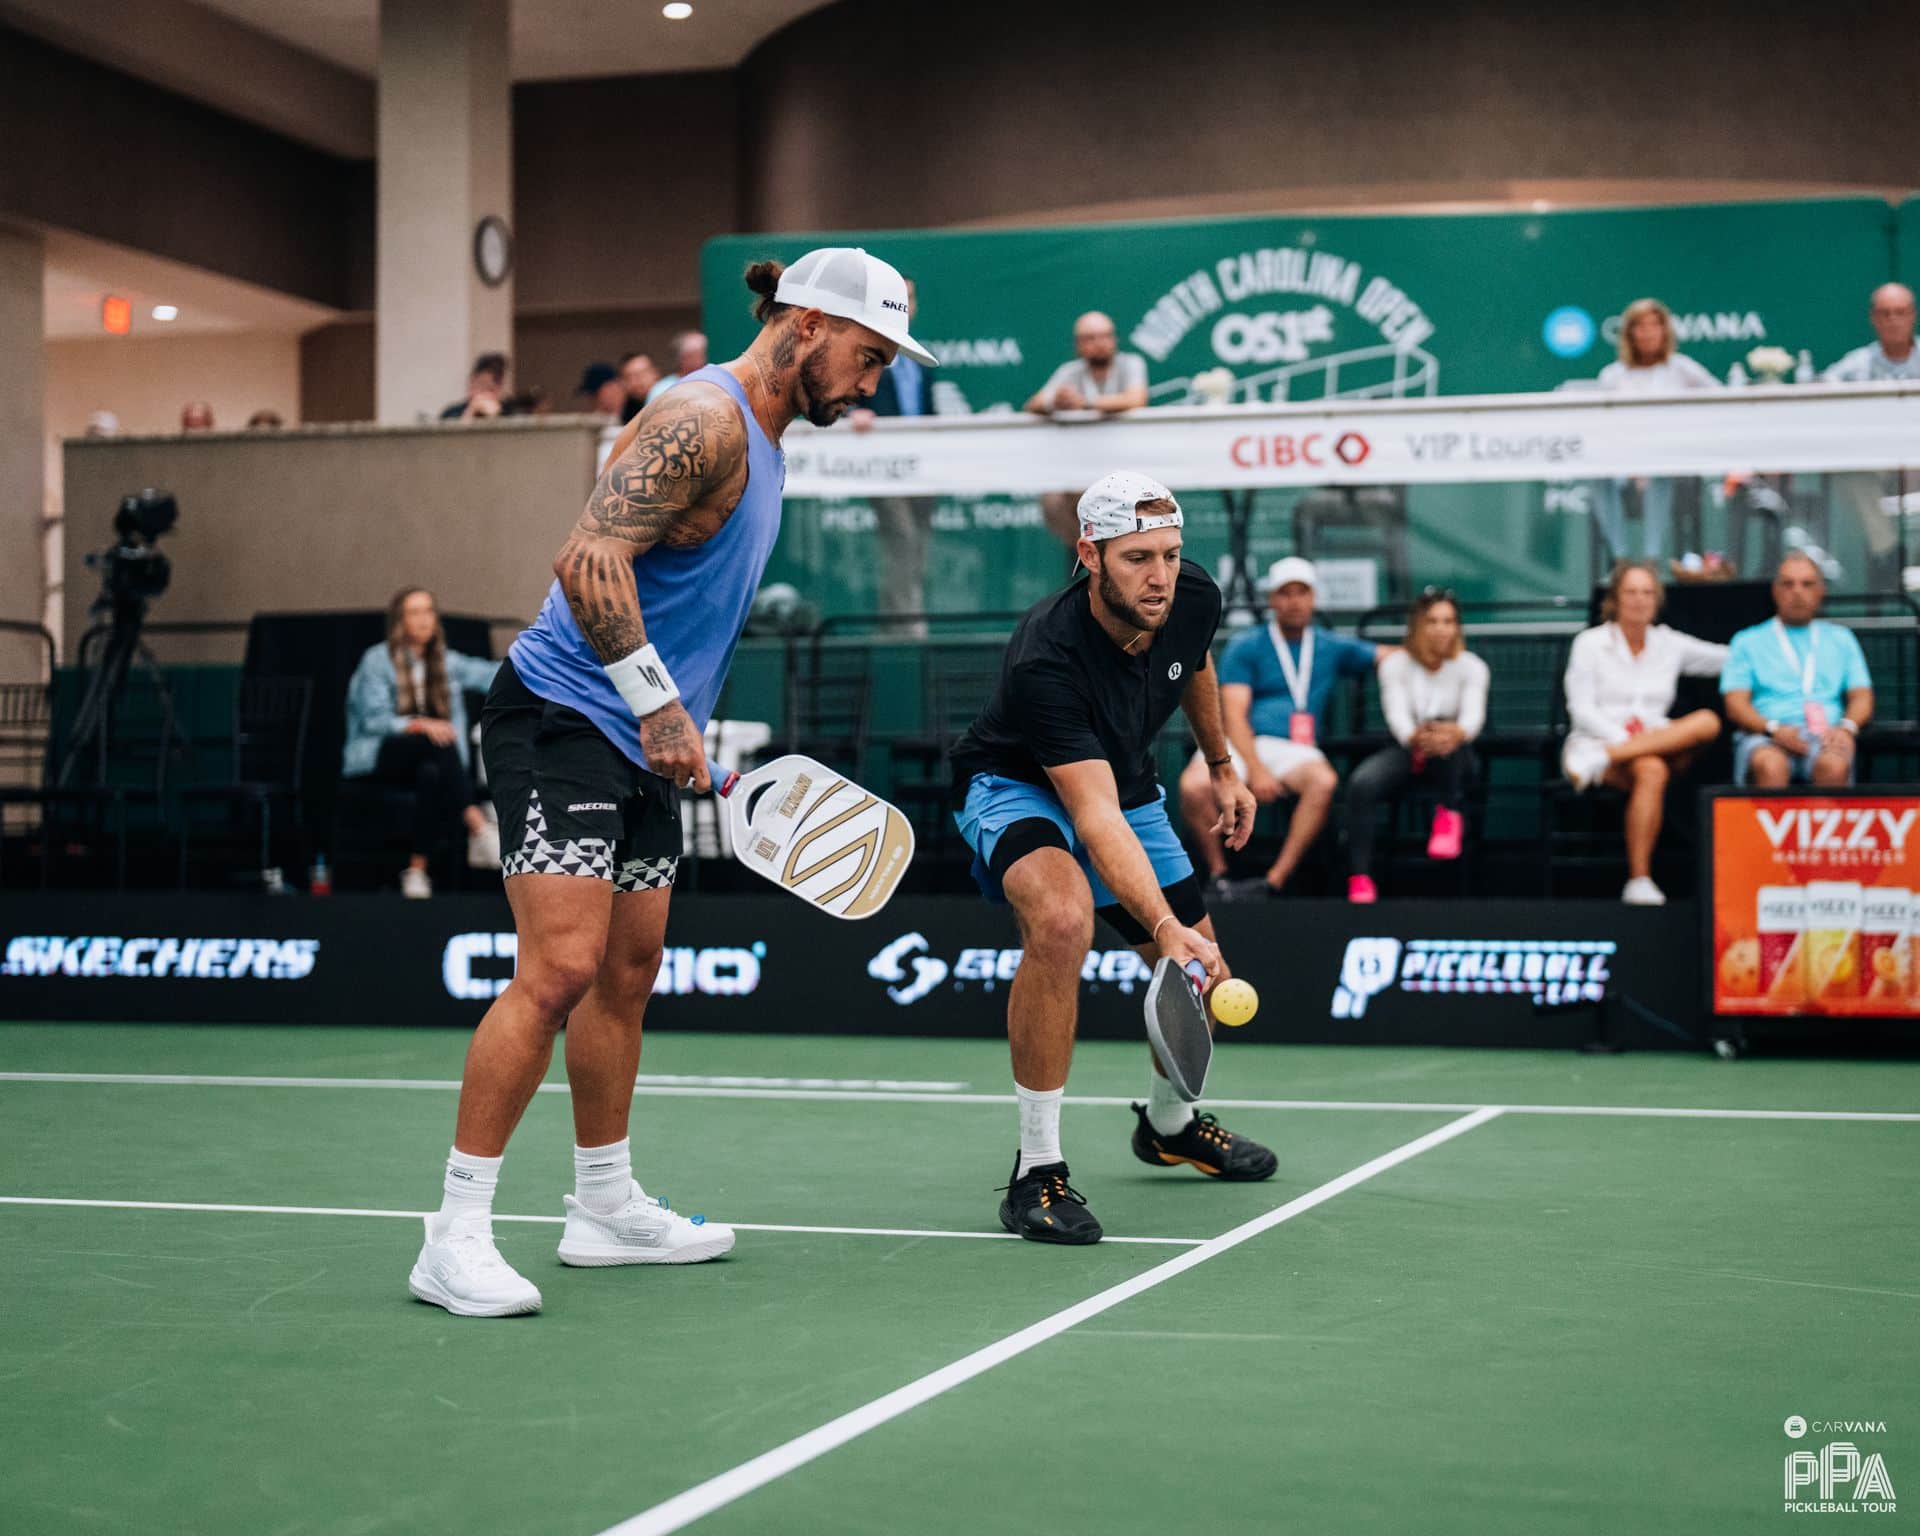 Sock and McGuffin Upset in First Round of Mens Doubles PPA Tour